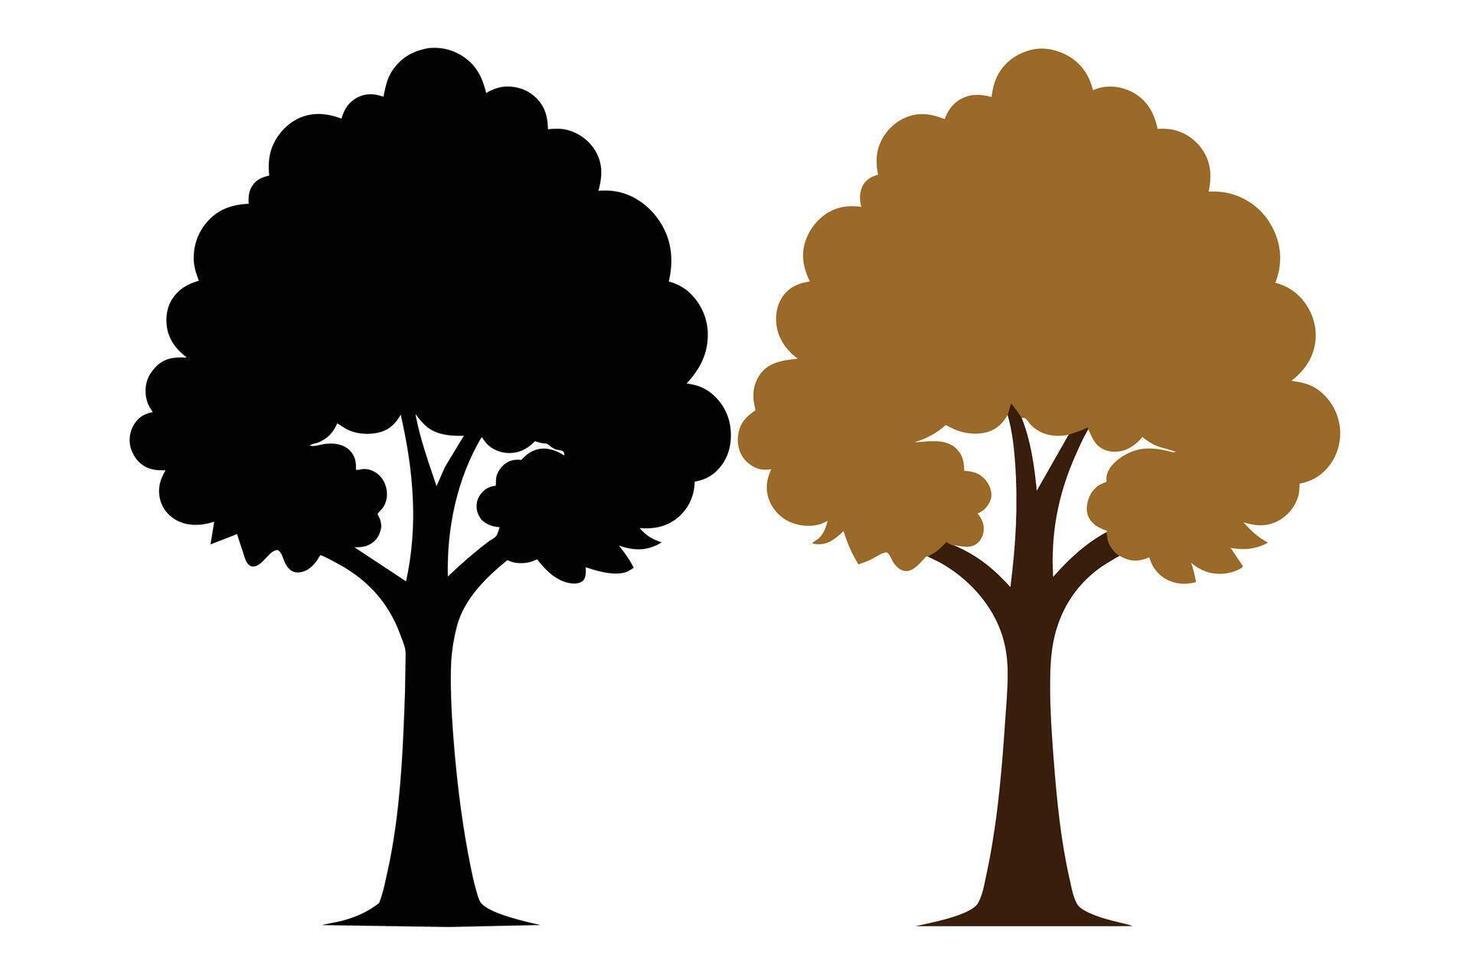 Black Sepia Trees Illustrations isolated on white background vector